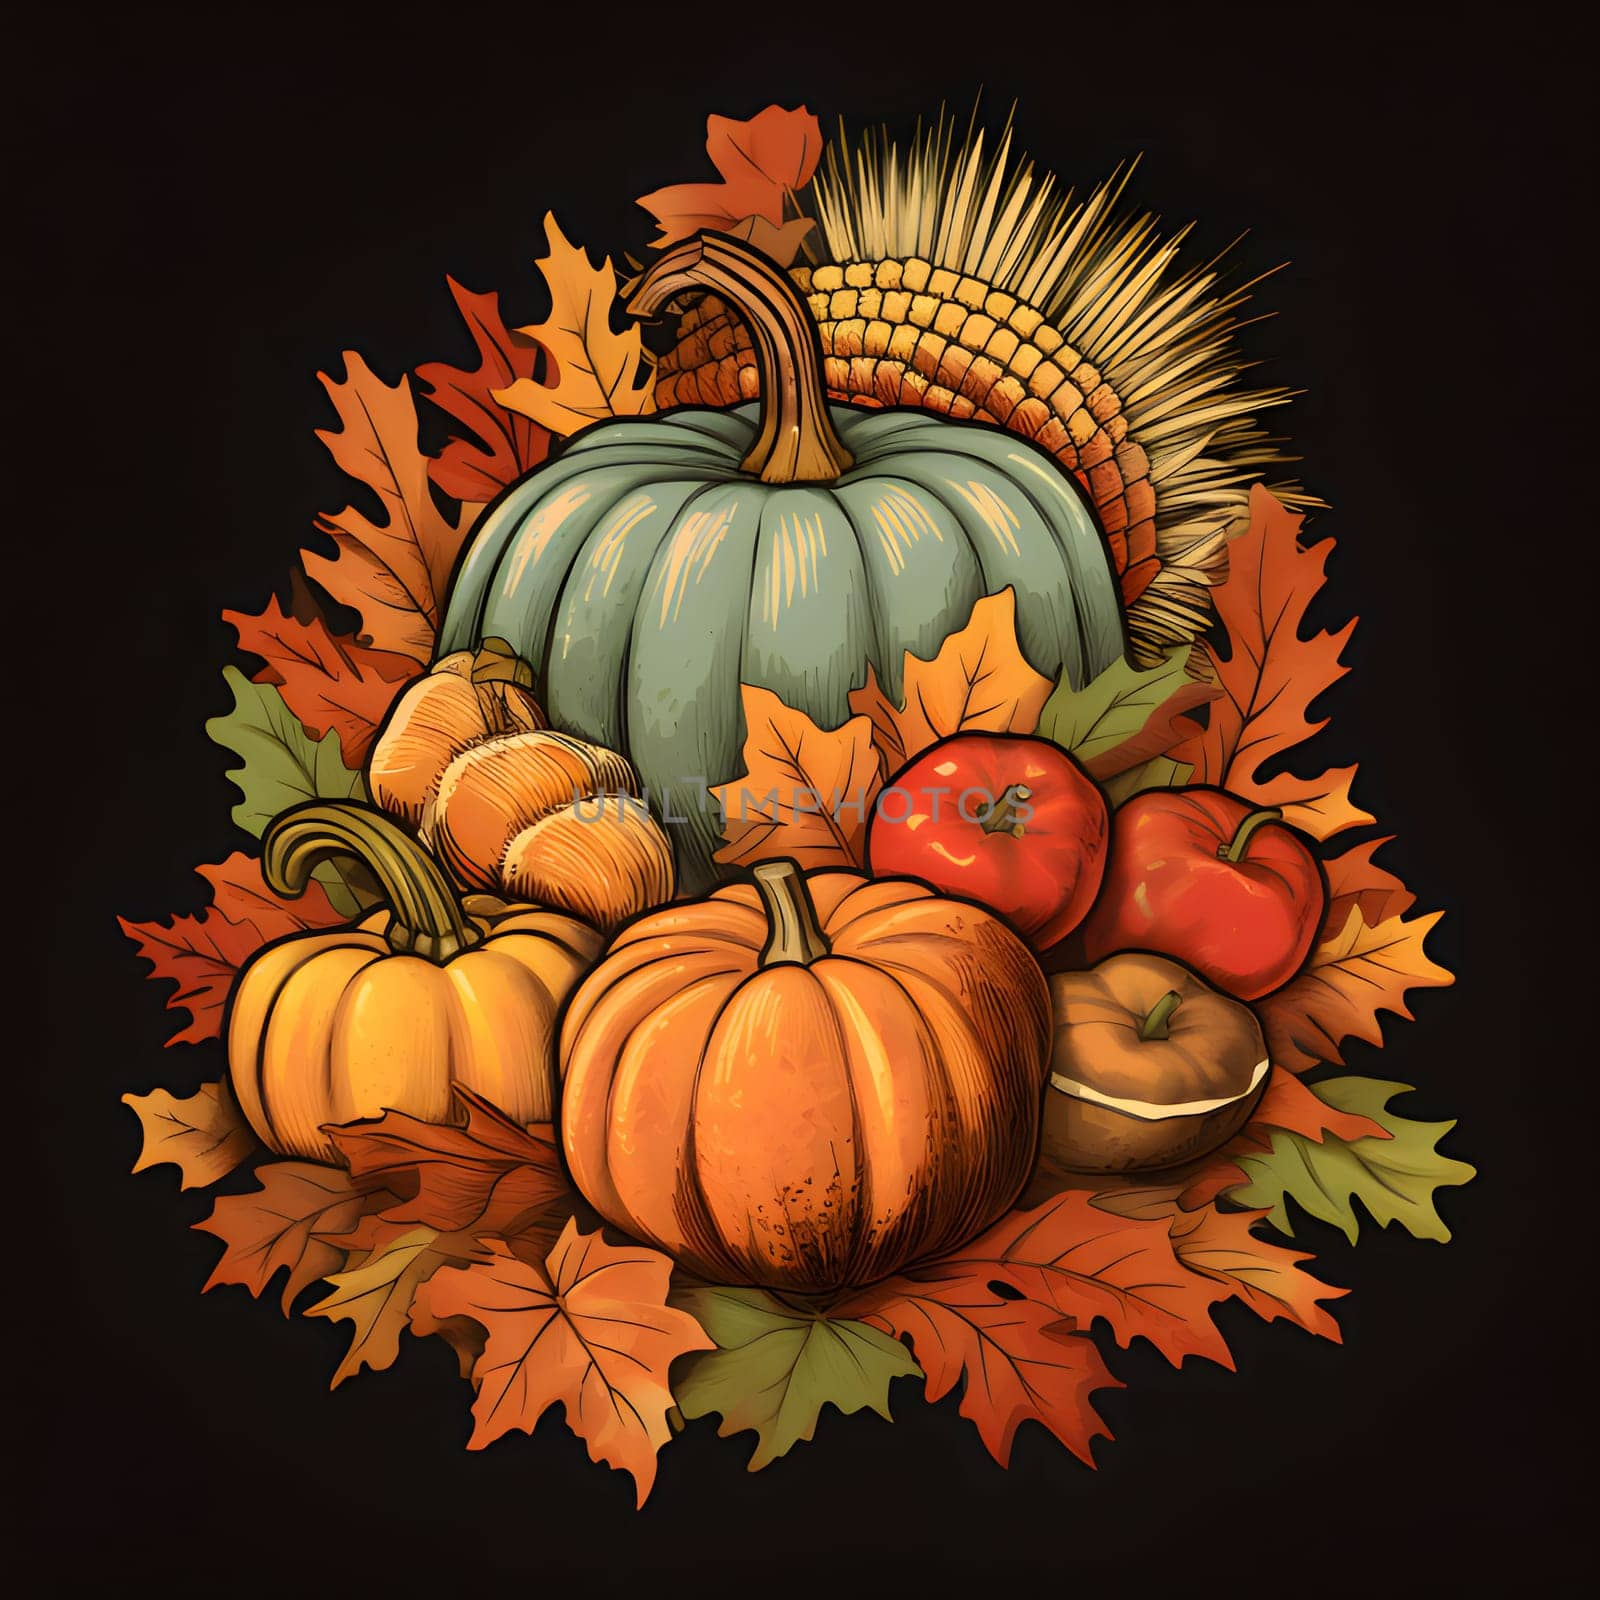 Illustration on black isolated background; pumpkins. tomatoes and autumn leaves. Pumpkin as a dish of thanksgiving for the harvest. by ThemesS